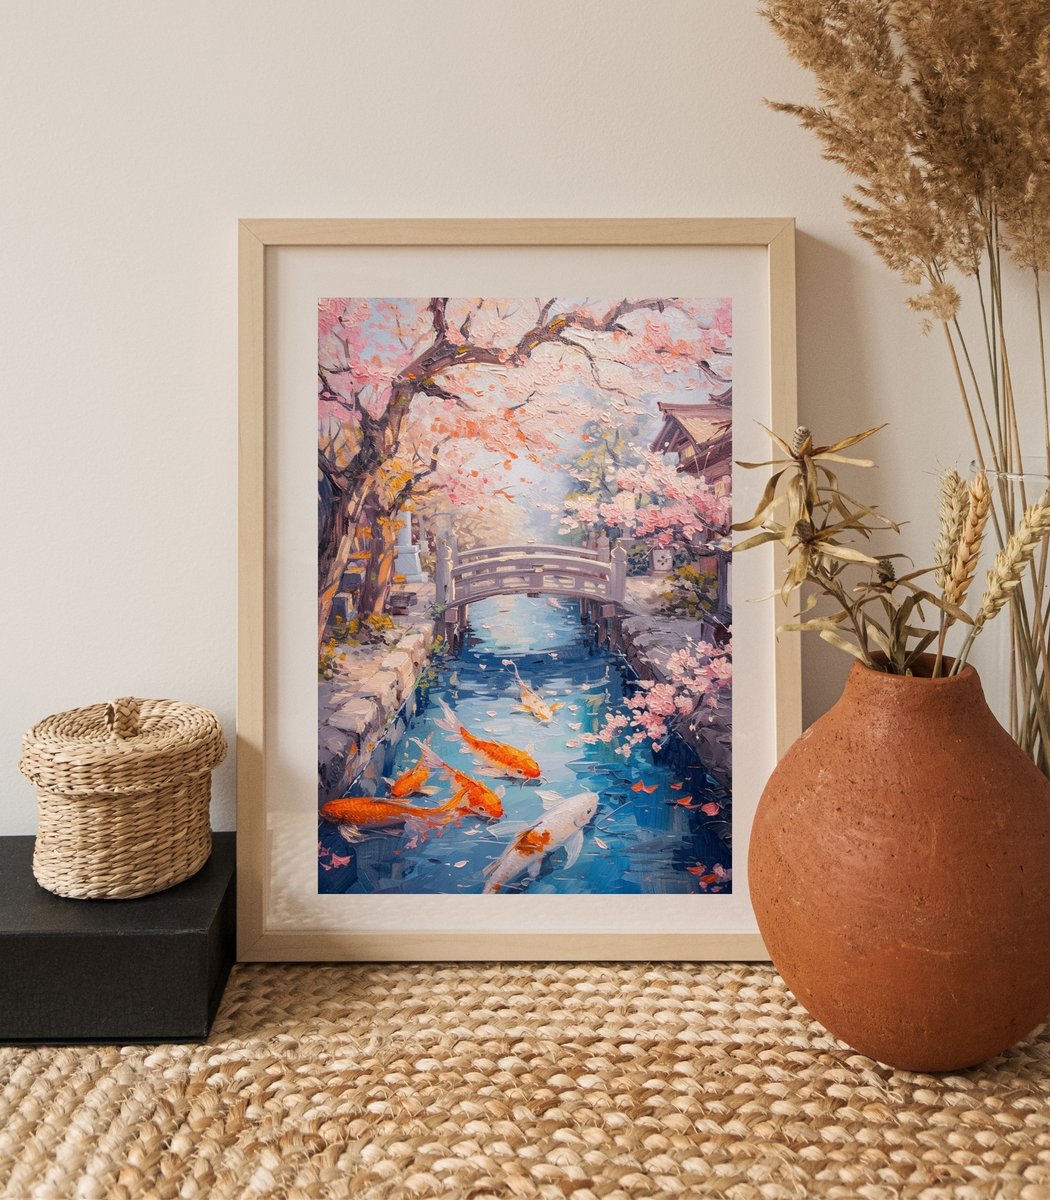 Tranquility flows with this serene koi pond print from Lena Art Design, a peaceful retreat in strokes of pink and blue. 🌸🐟 #ZenArt #KoiPondPrint #LenaArtDesign